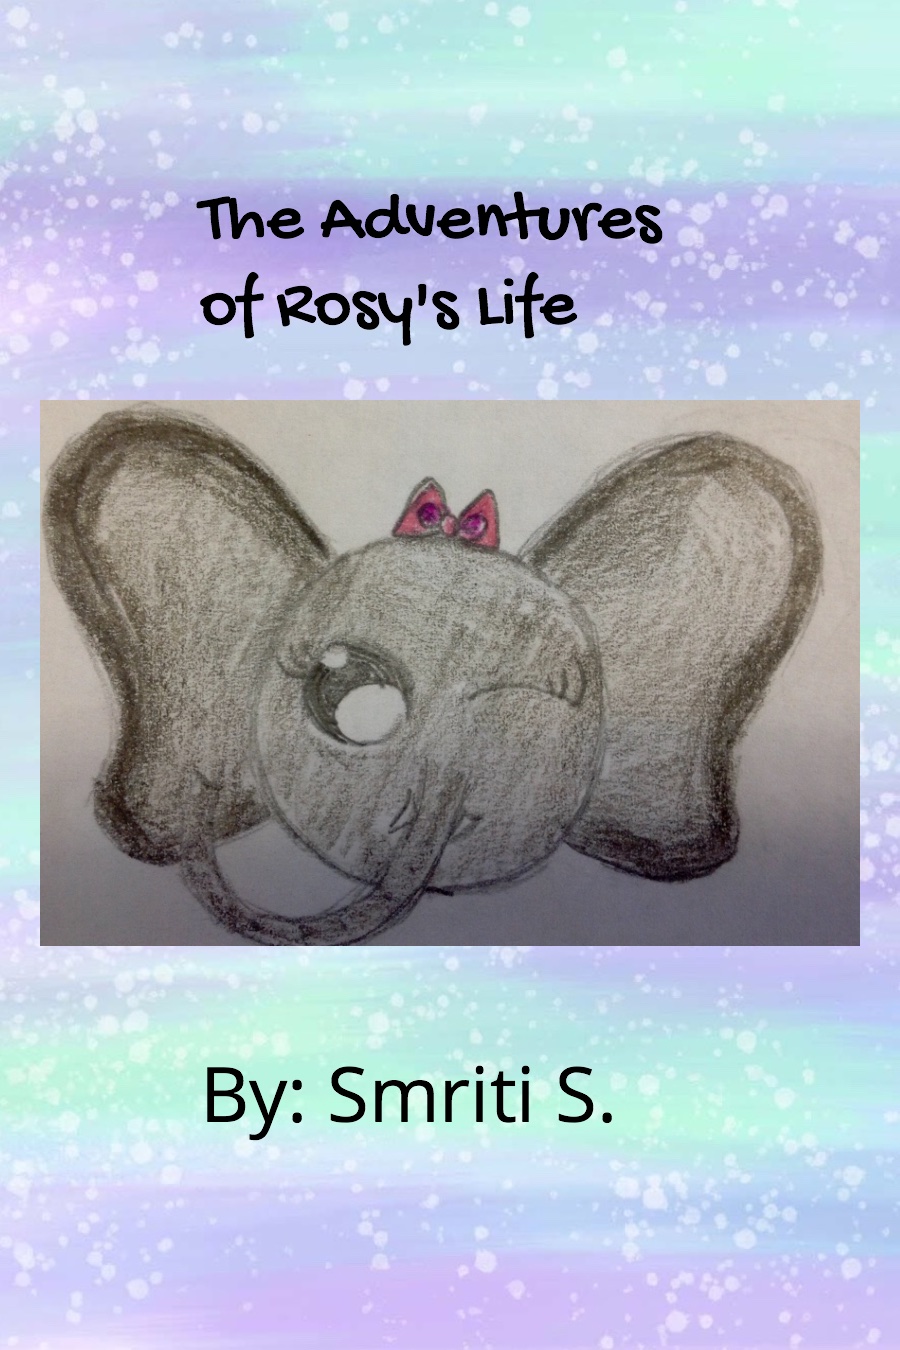 The Adventure of Rosy’s Life By Smriti S